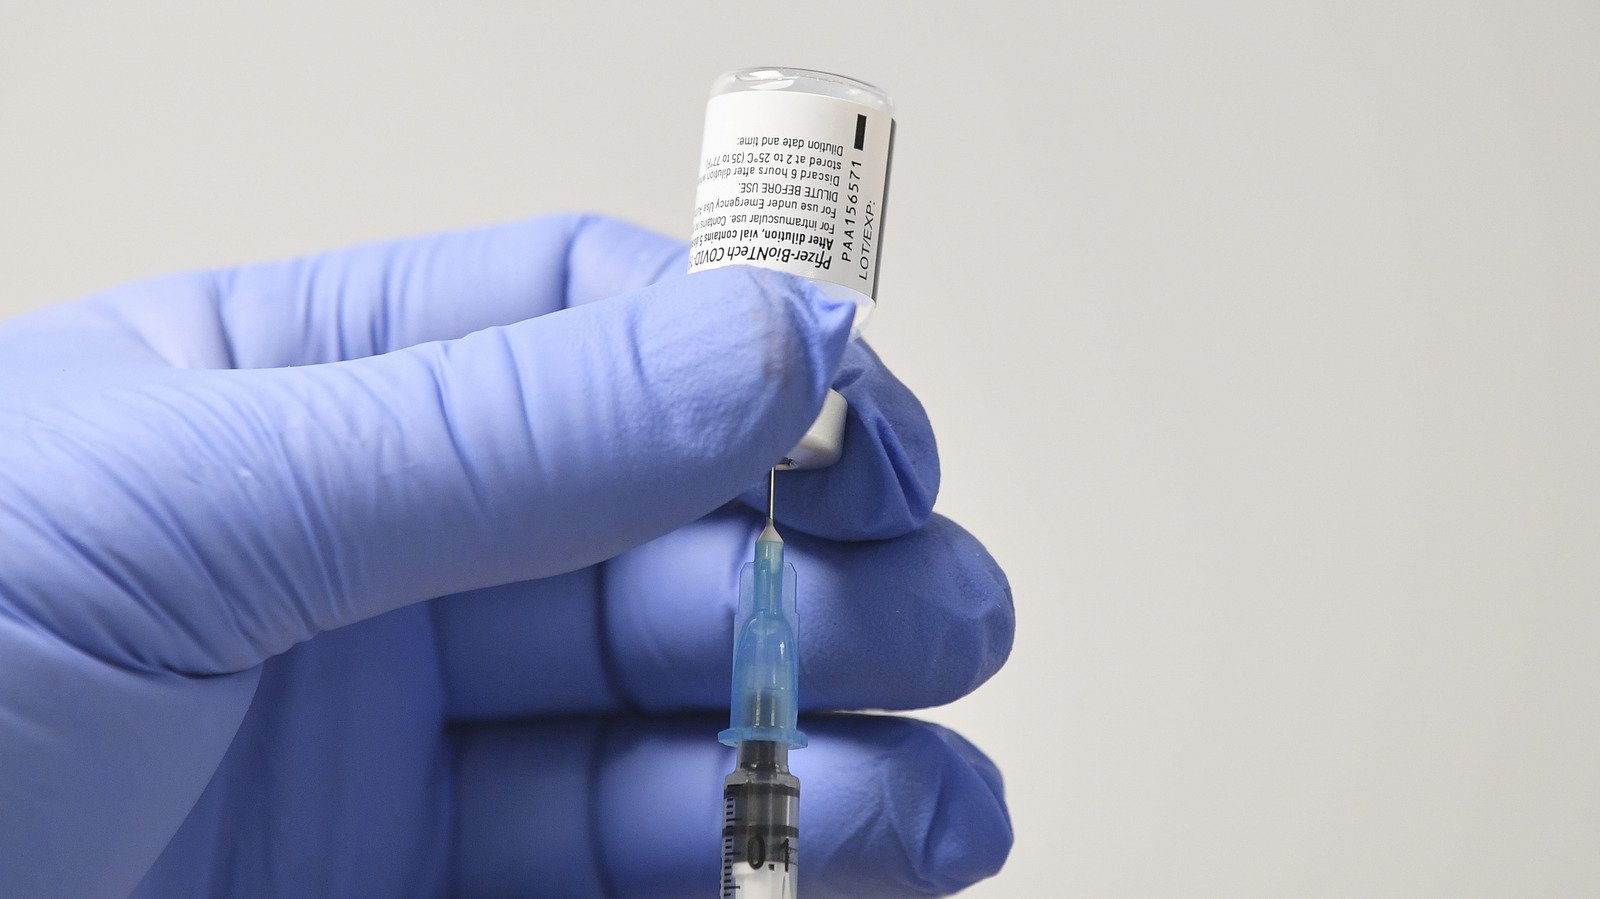 Read This Before Getting The COVID-19 Vaccine - The List